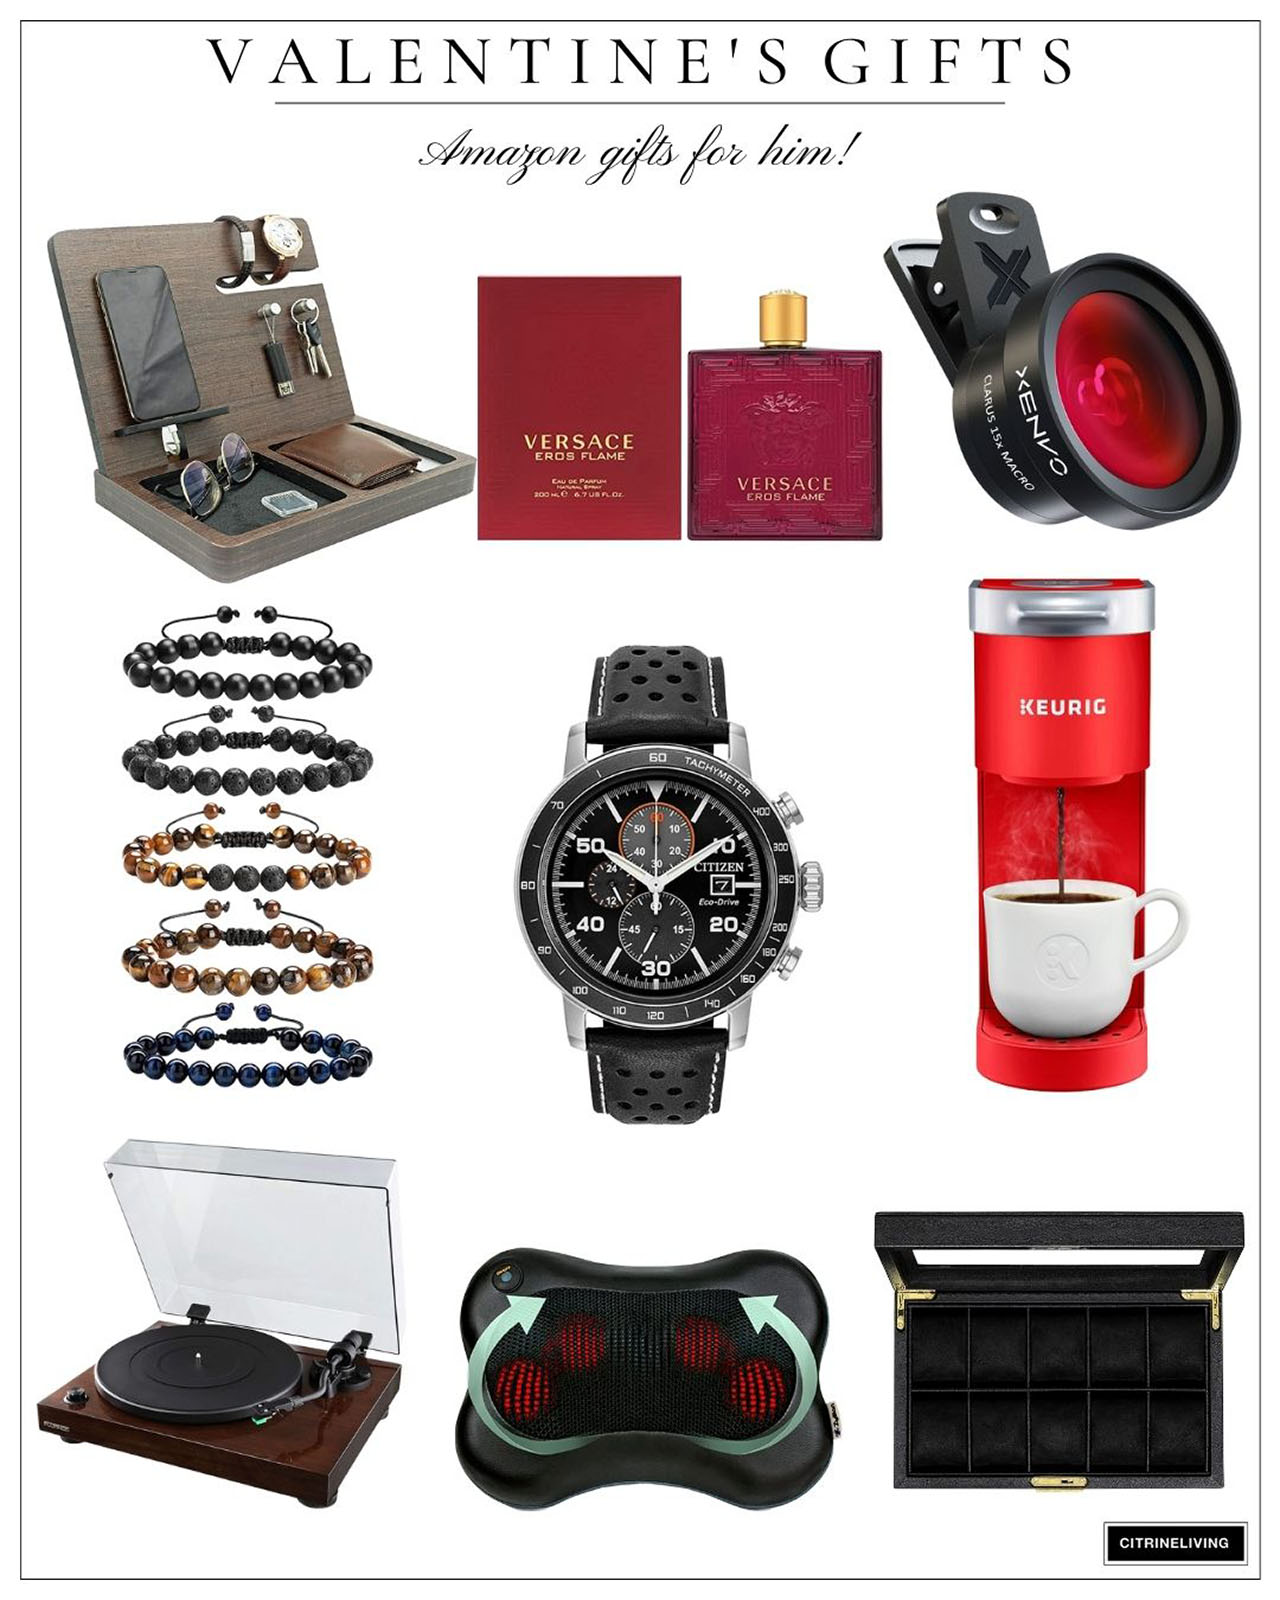 Valentine's Day gift ideas for him